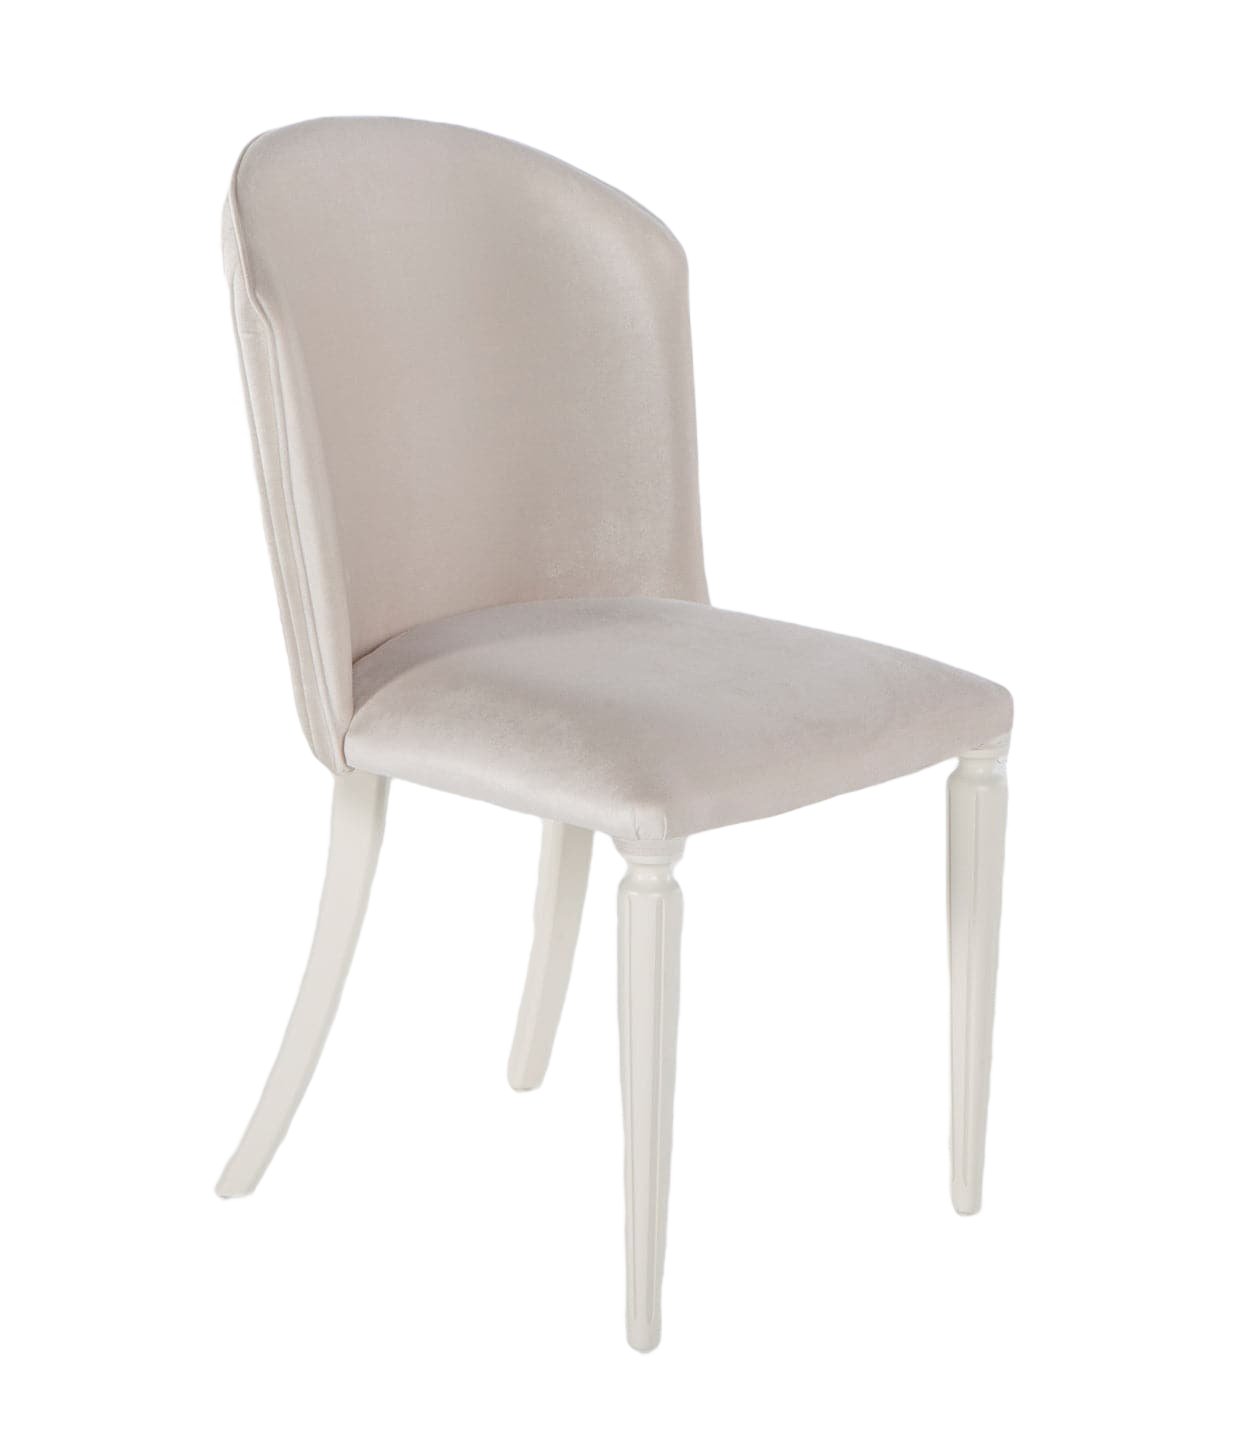 Mistral Dining Chair by Bellona Dining Chair